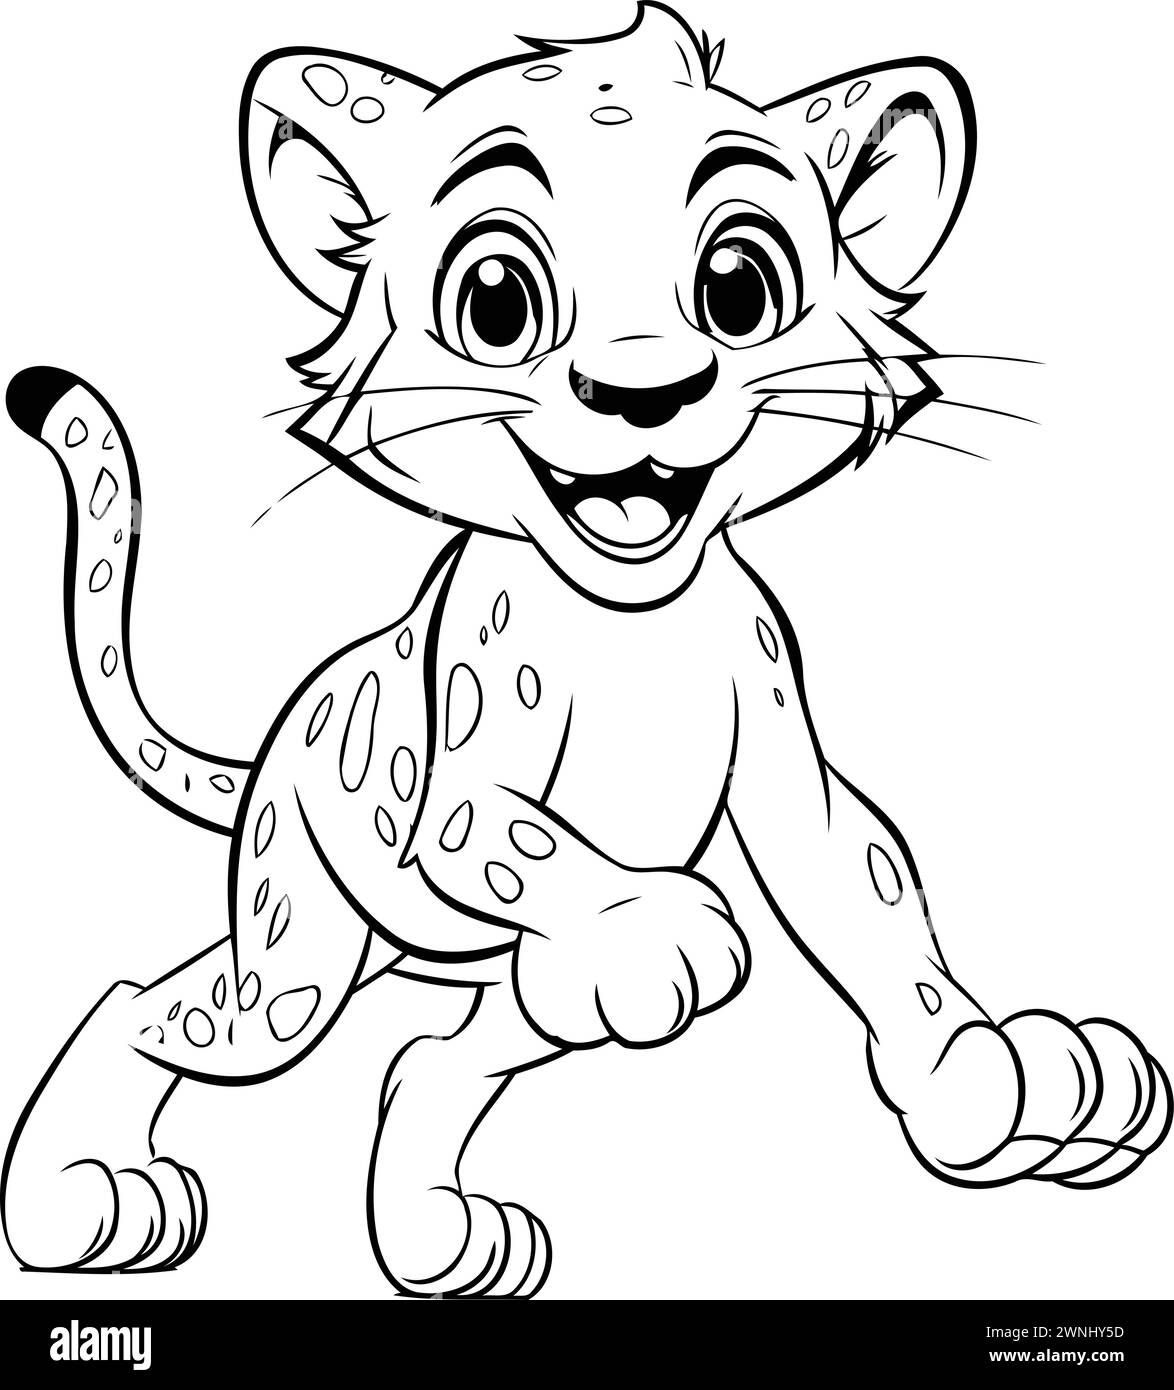 Cheetah - Coloring Book for Kids - Vector Illustration Stock Vector